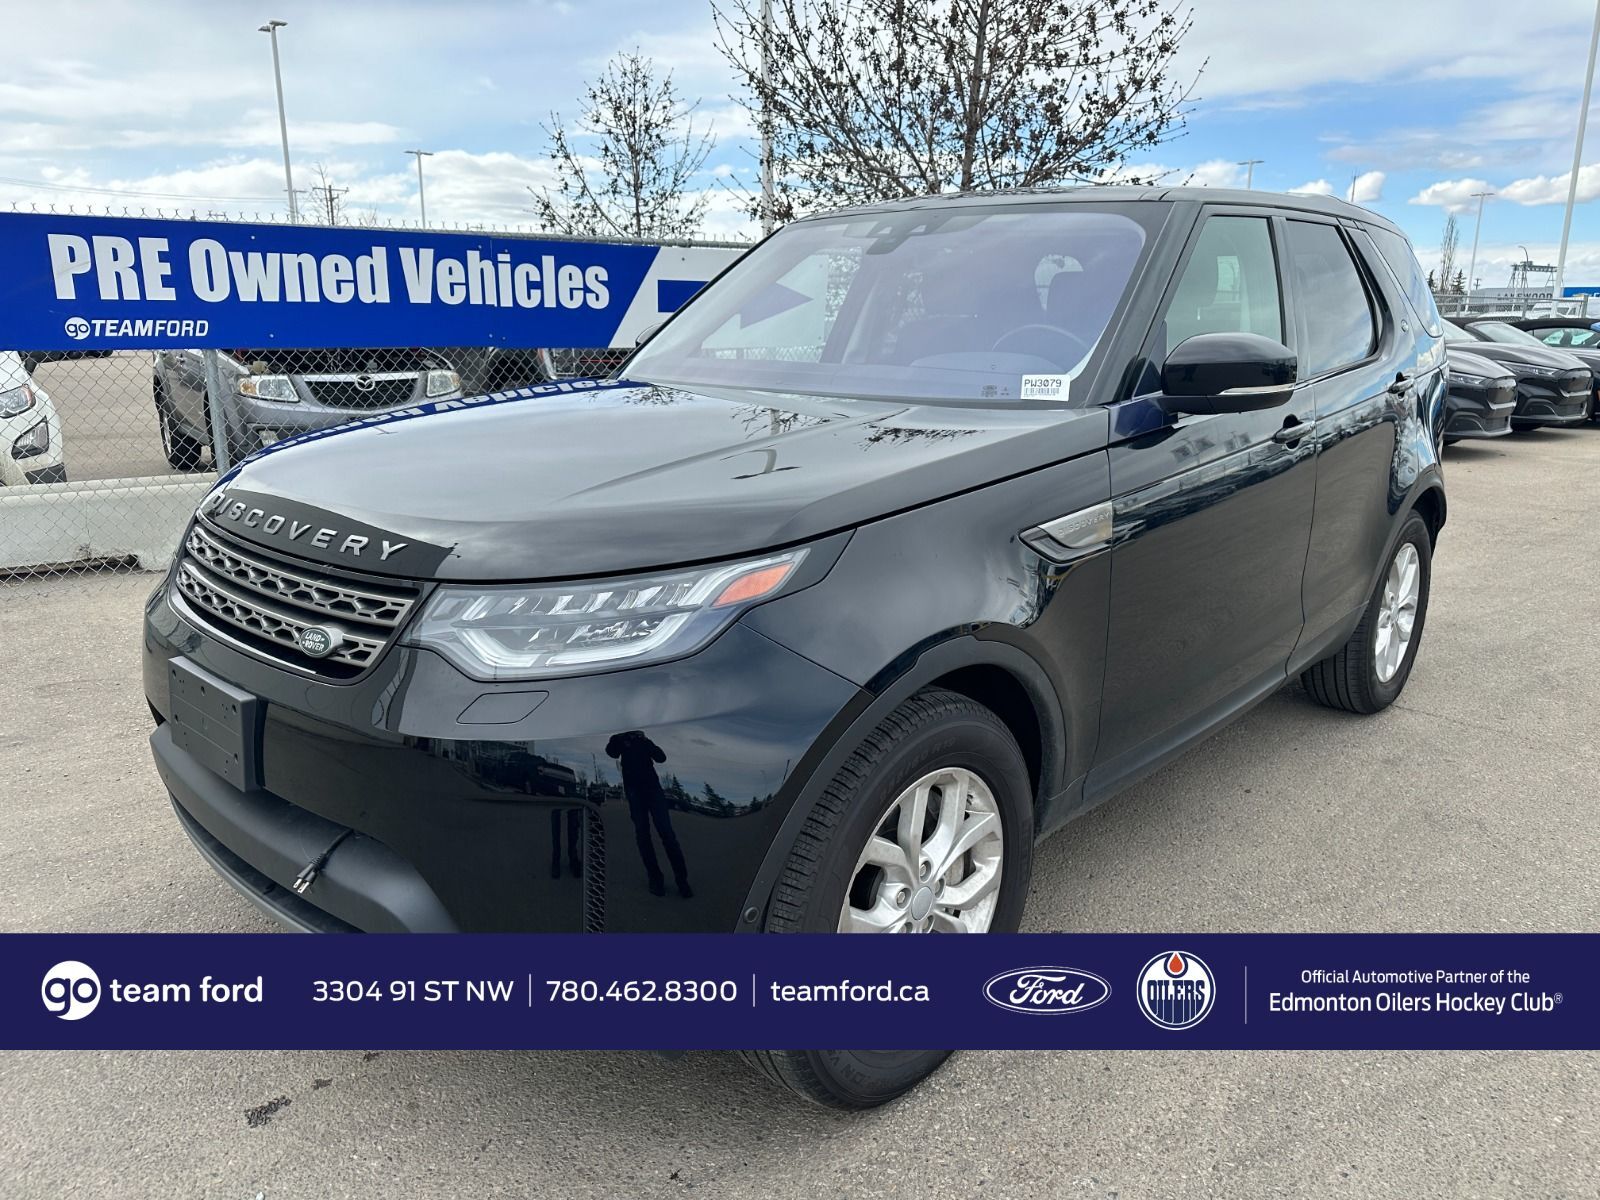 2019 Land Rover Discovery SE - AWD, LEATHER, HEATED SEATS, BACK UP CAM, AND 